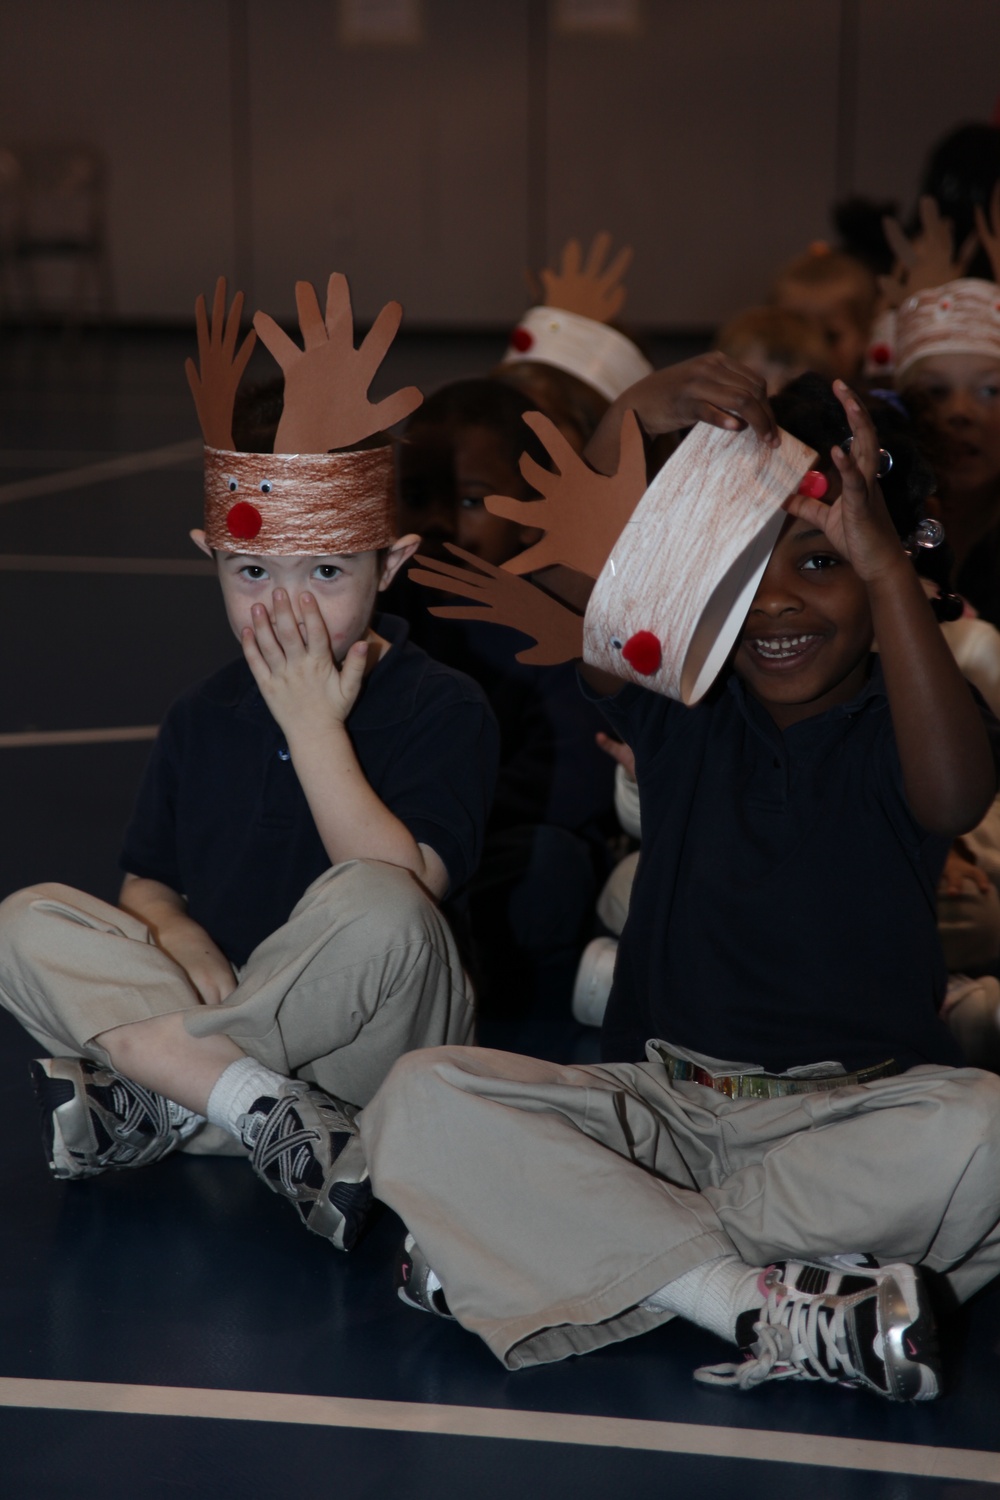 Havelock Elementary students send Christmas cheer to deployed Cherry Point Marines